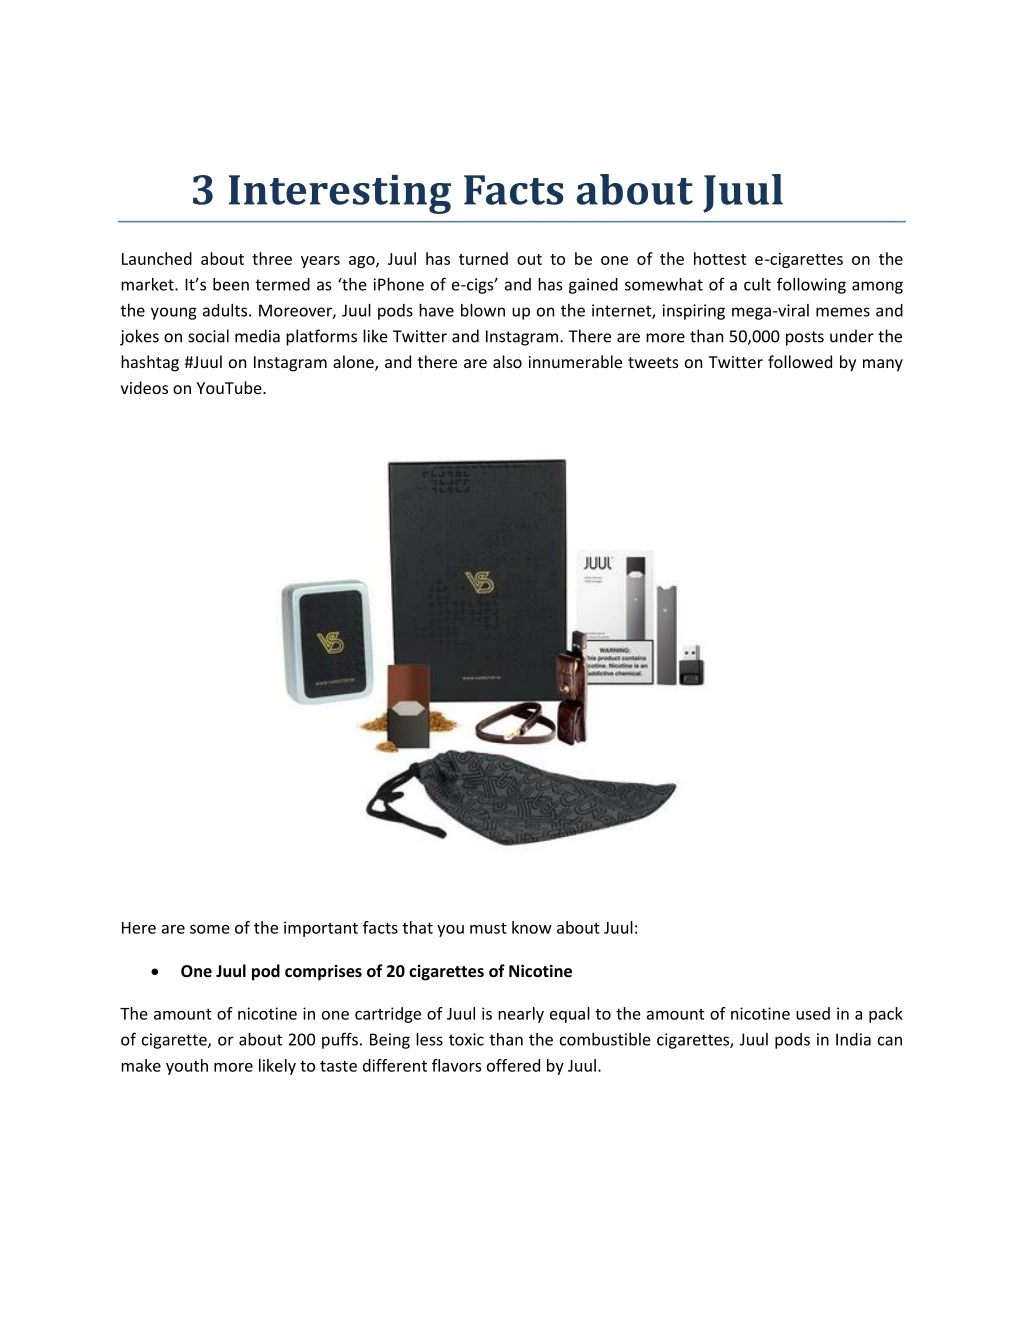 3 interesting facts about juul